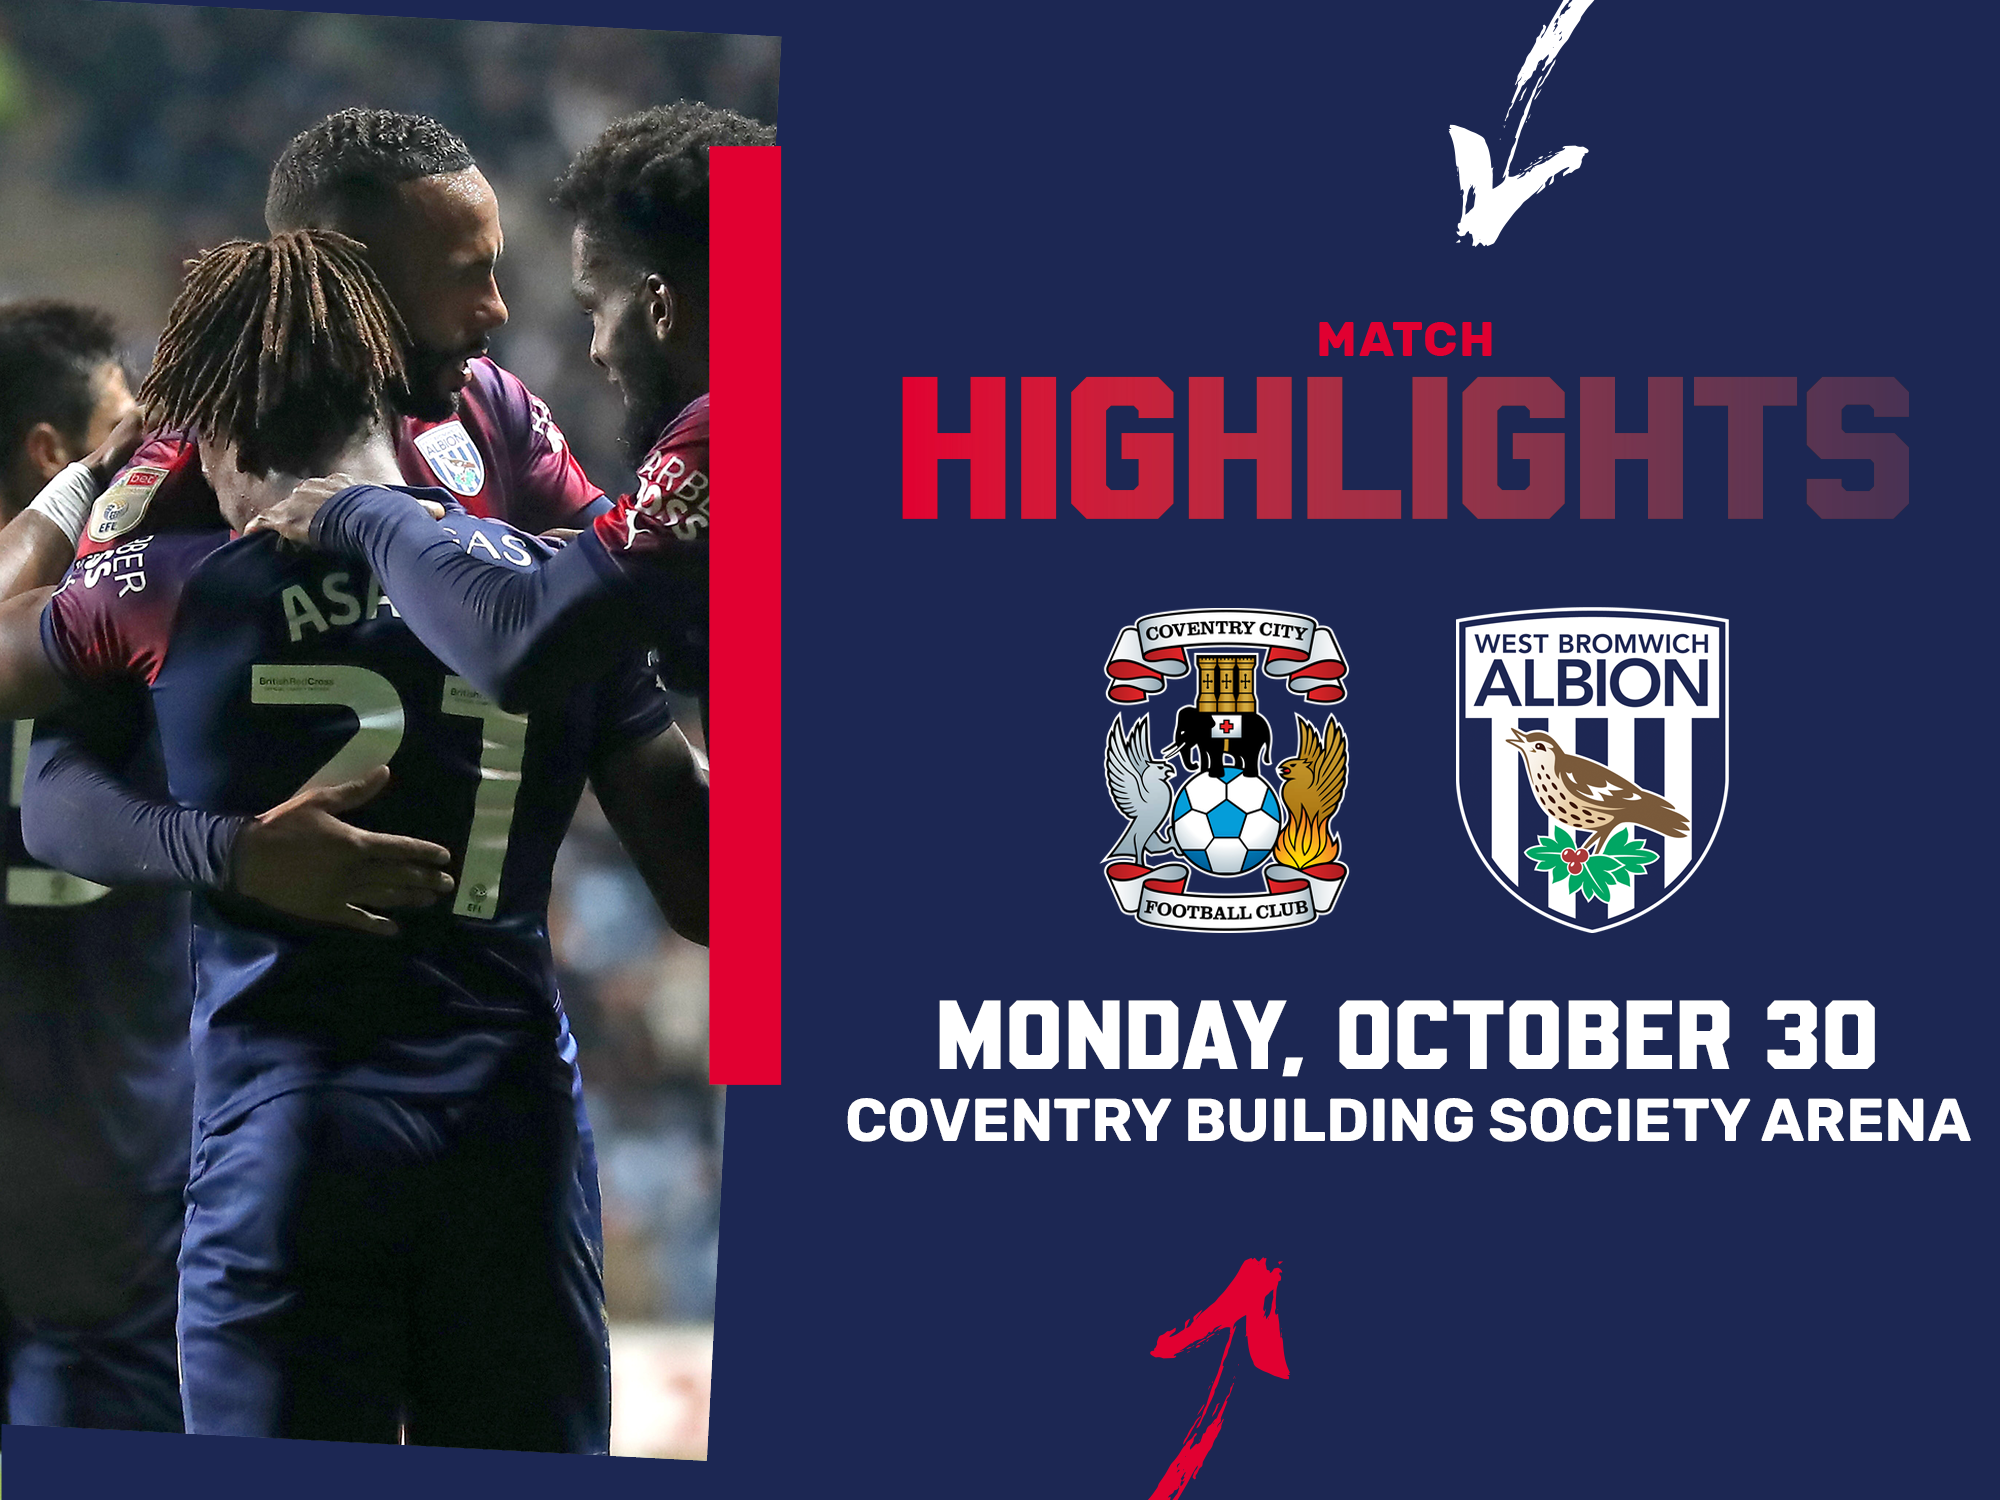 A photo graphic, in the red and blue 2023/24 away colours, with the club crests of Albion and Coventry, showing Brandon Thomas-Asante, Kyle Bartley and Cedric Kirpe hugging after Asante's goal v Coventry City - which lead to highlights from the game